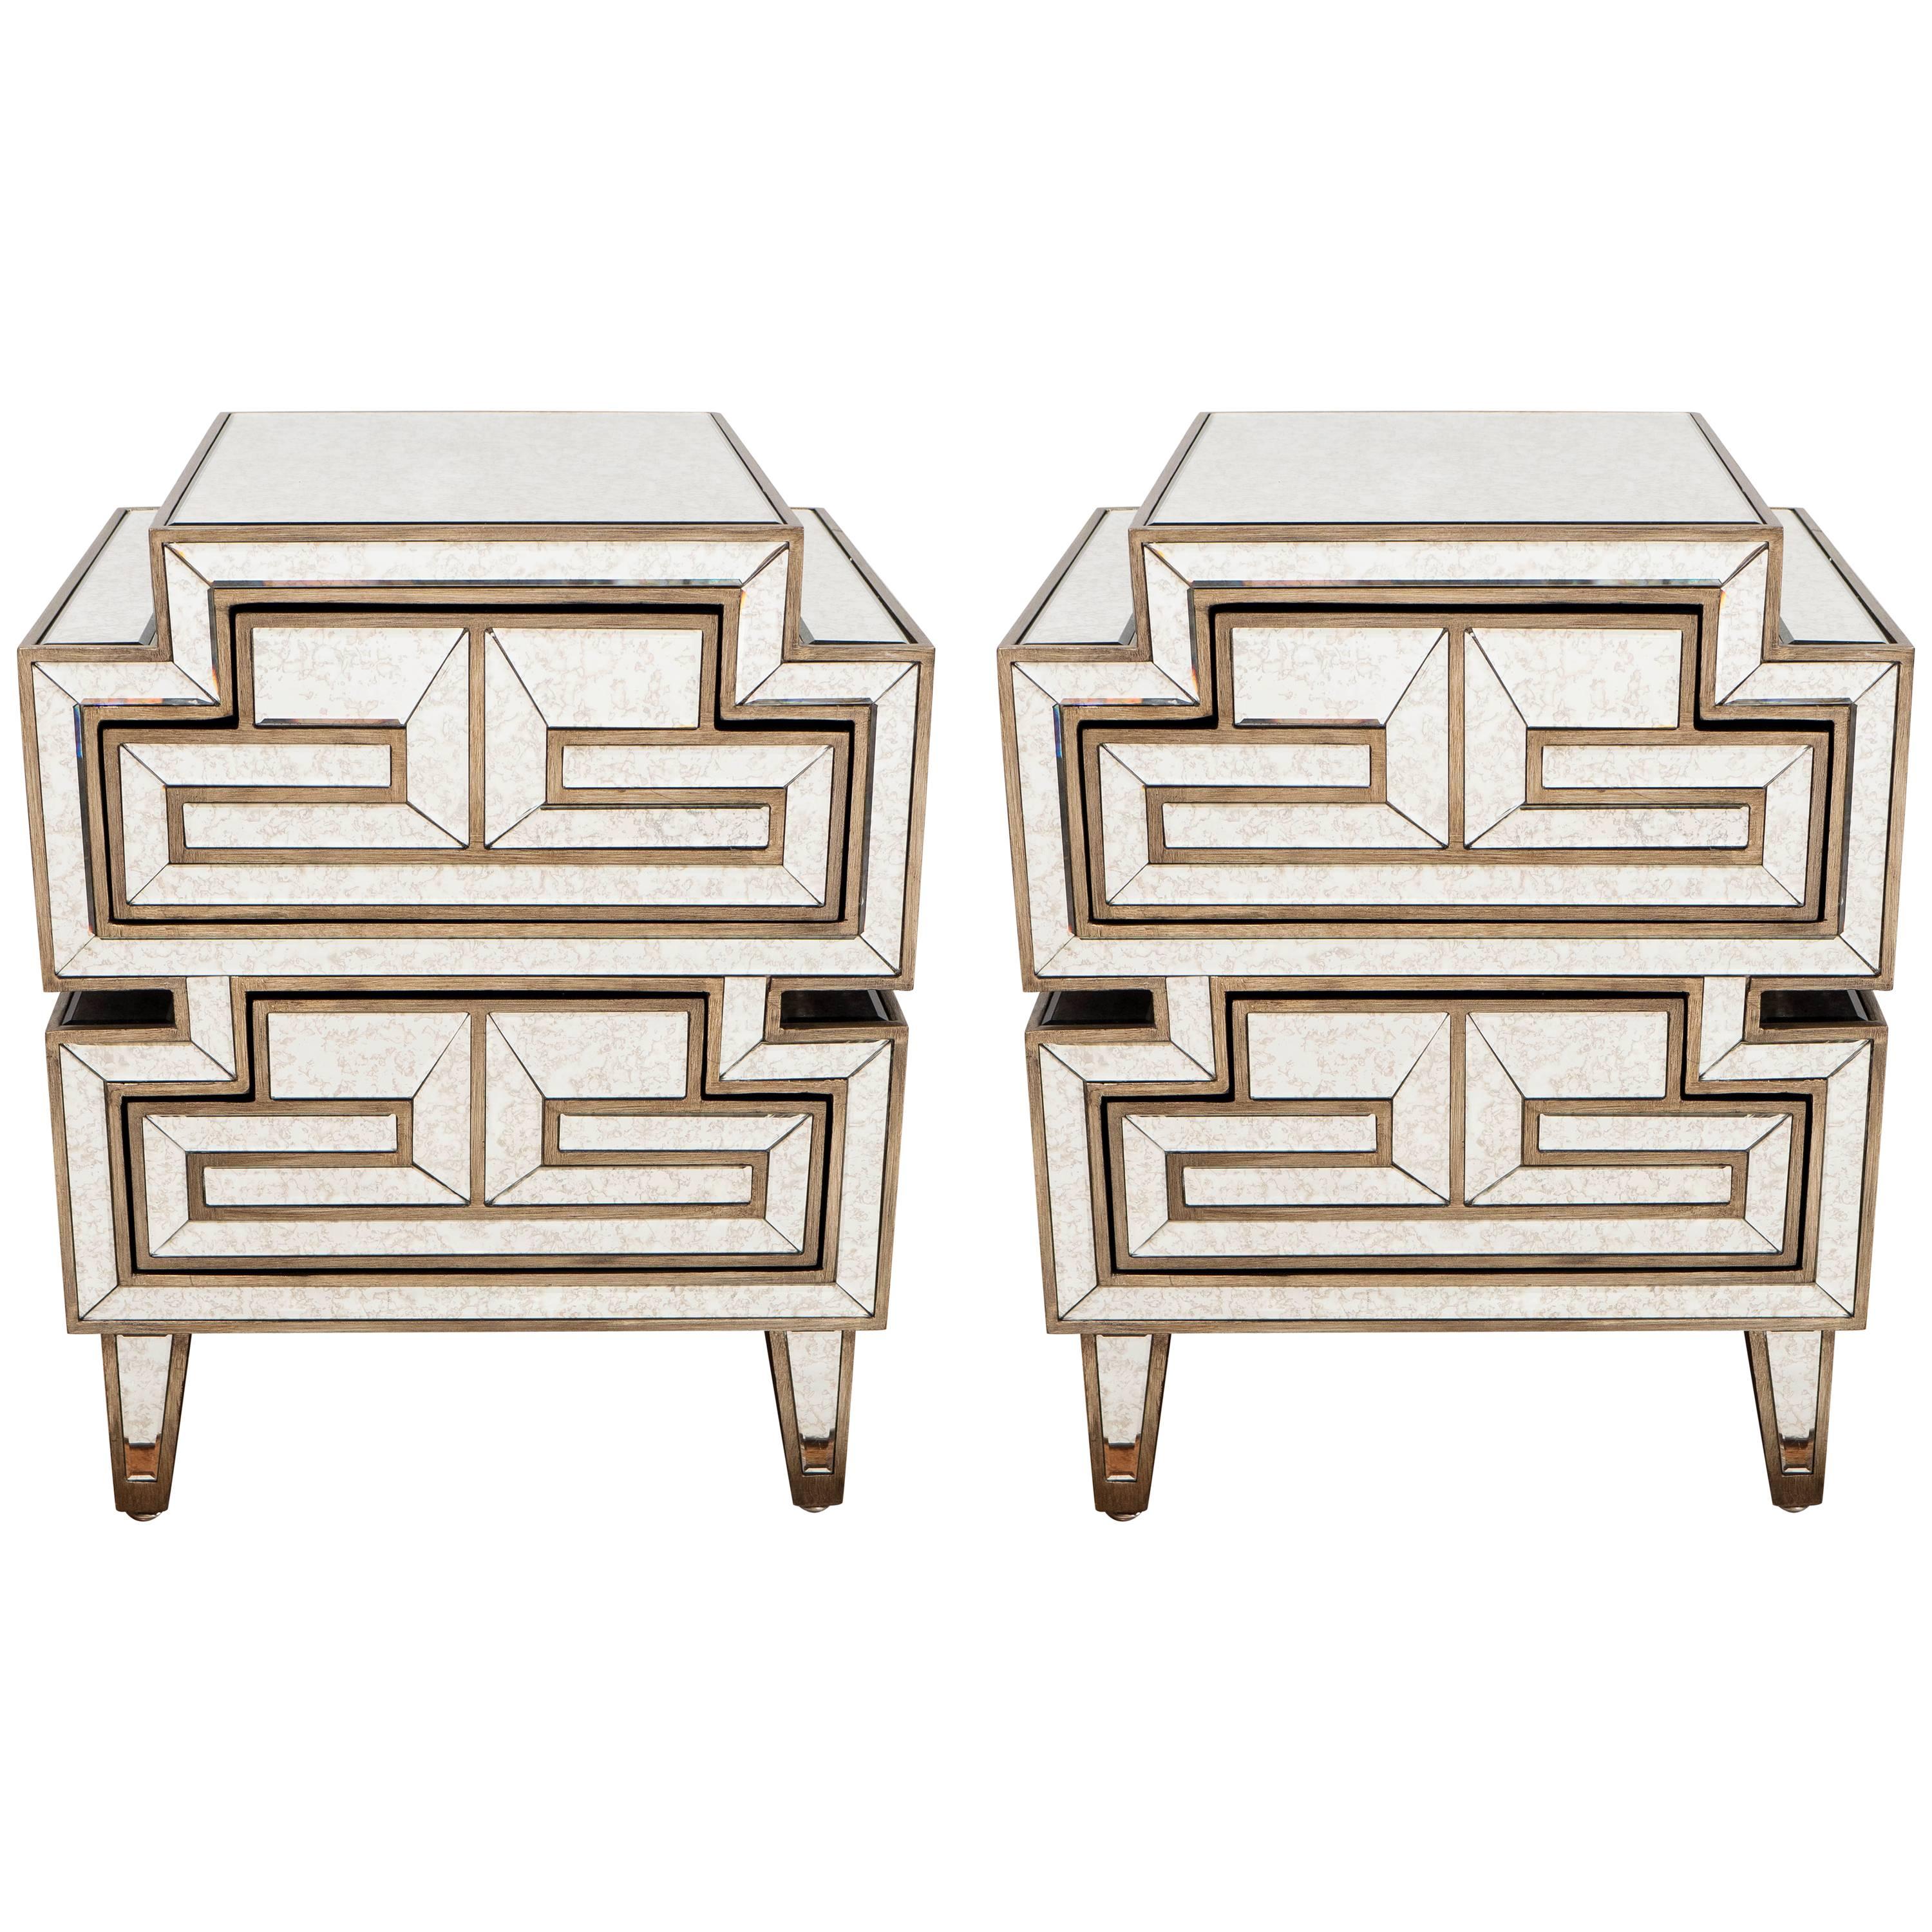 Pair of Asian Inspired Custom-Made Eglomise Side Tables and Night Stands